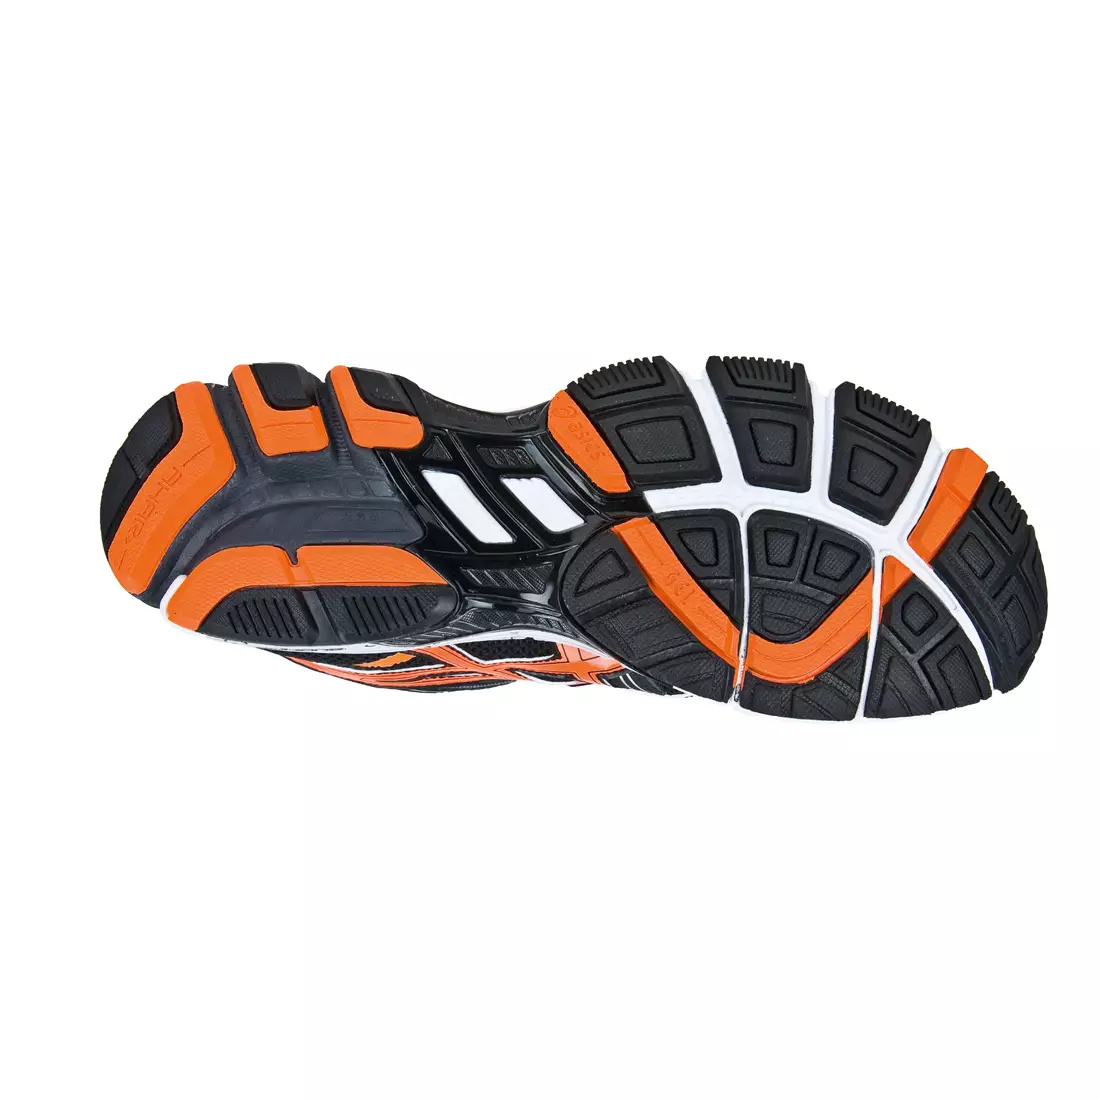 ASICS GT-1000 G-TX - 9030 running shoes, color: Black and orange